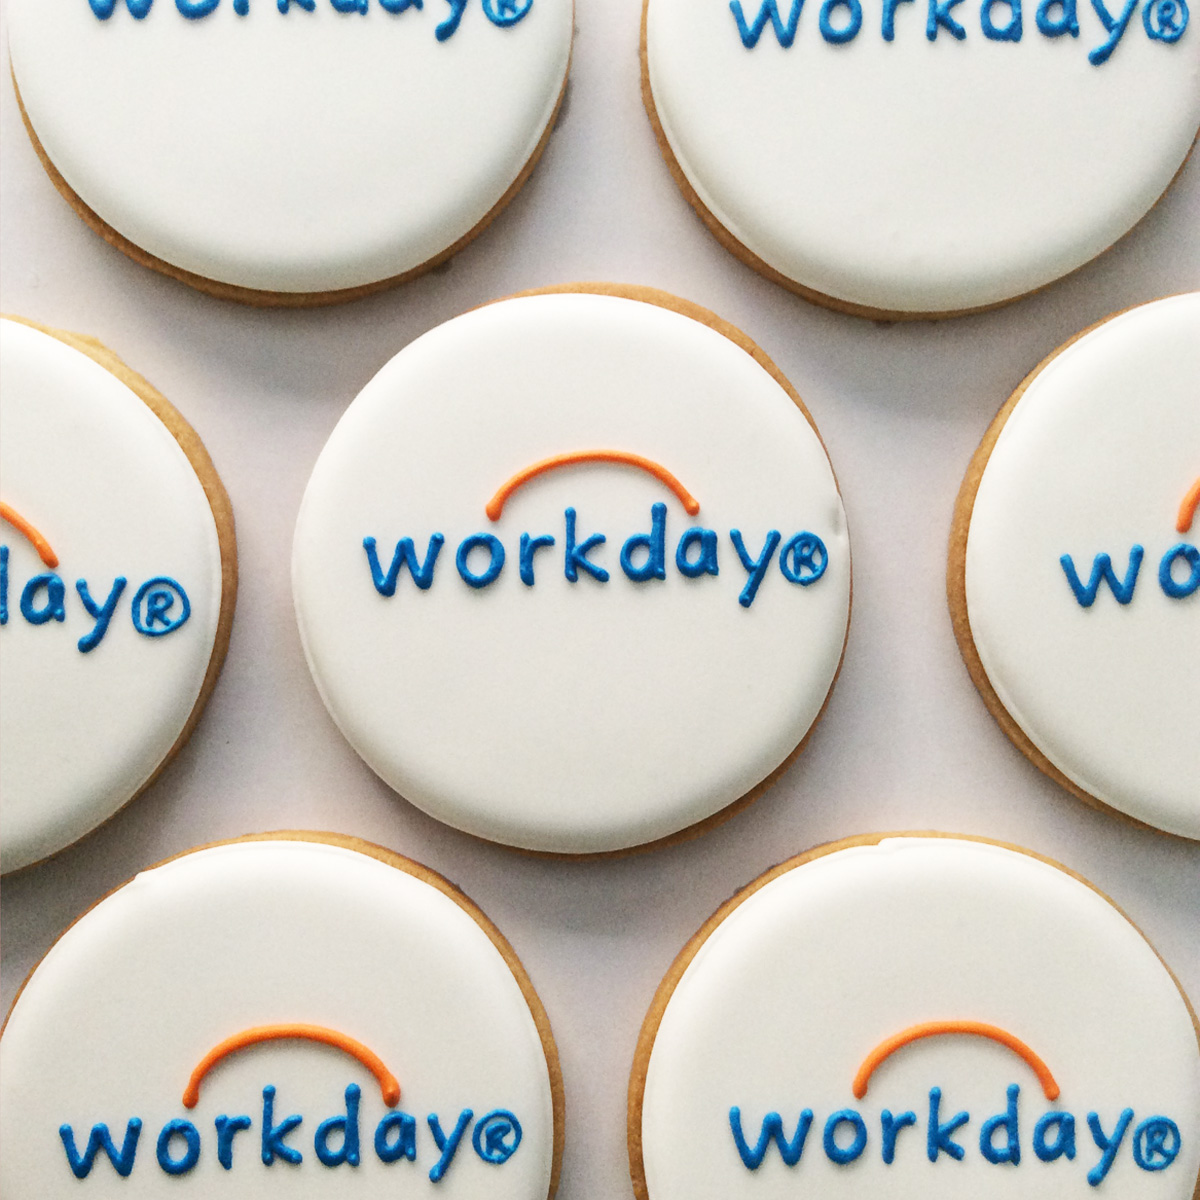 「workday」ロゴクッキー